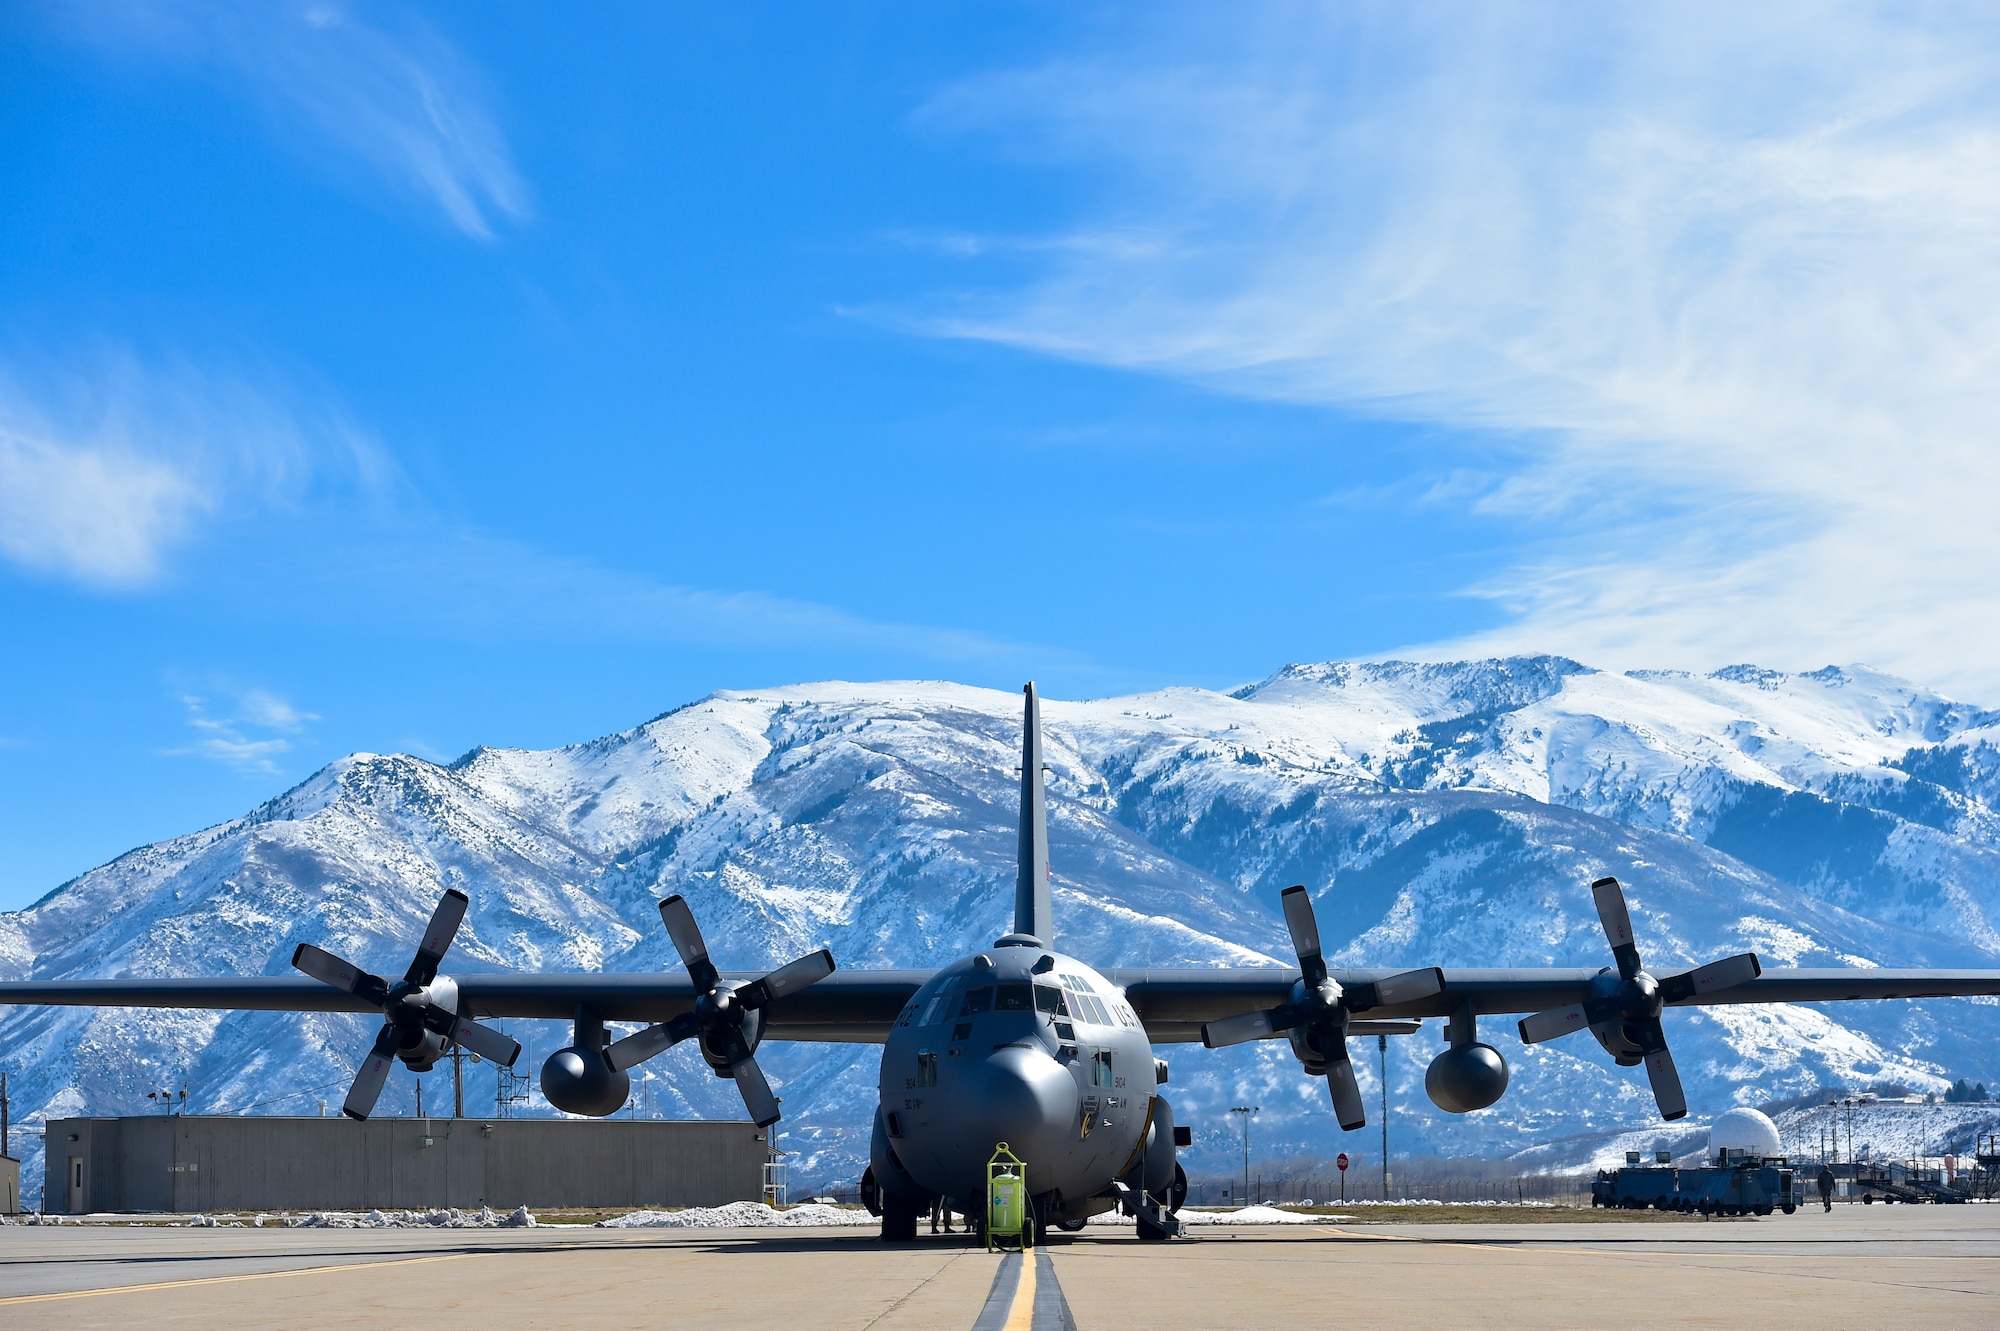 A 910th Airlift Wing C-130H Hercules sits on the ramp at Hill Air Force Base (AFB), Utah, March 7, 2018 during an aerial spray mission.